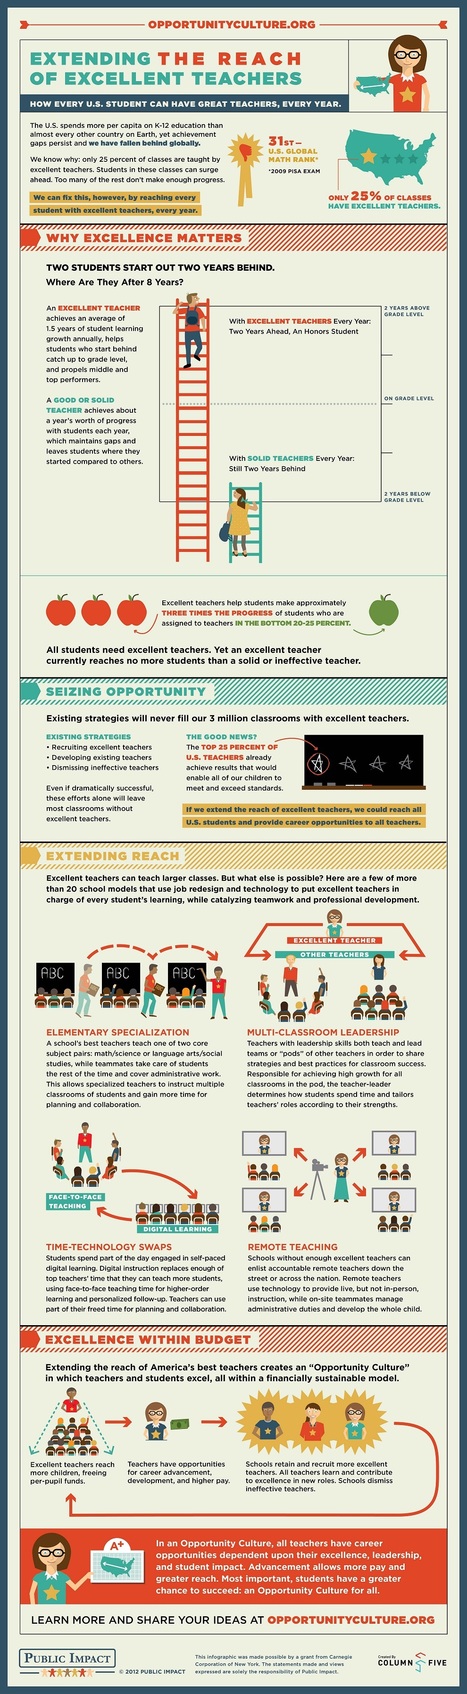 How To Extend The Reach Of Excellent Teachers [Infographic] | 21st Century Learning and Teaching | Scoop.it